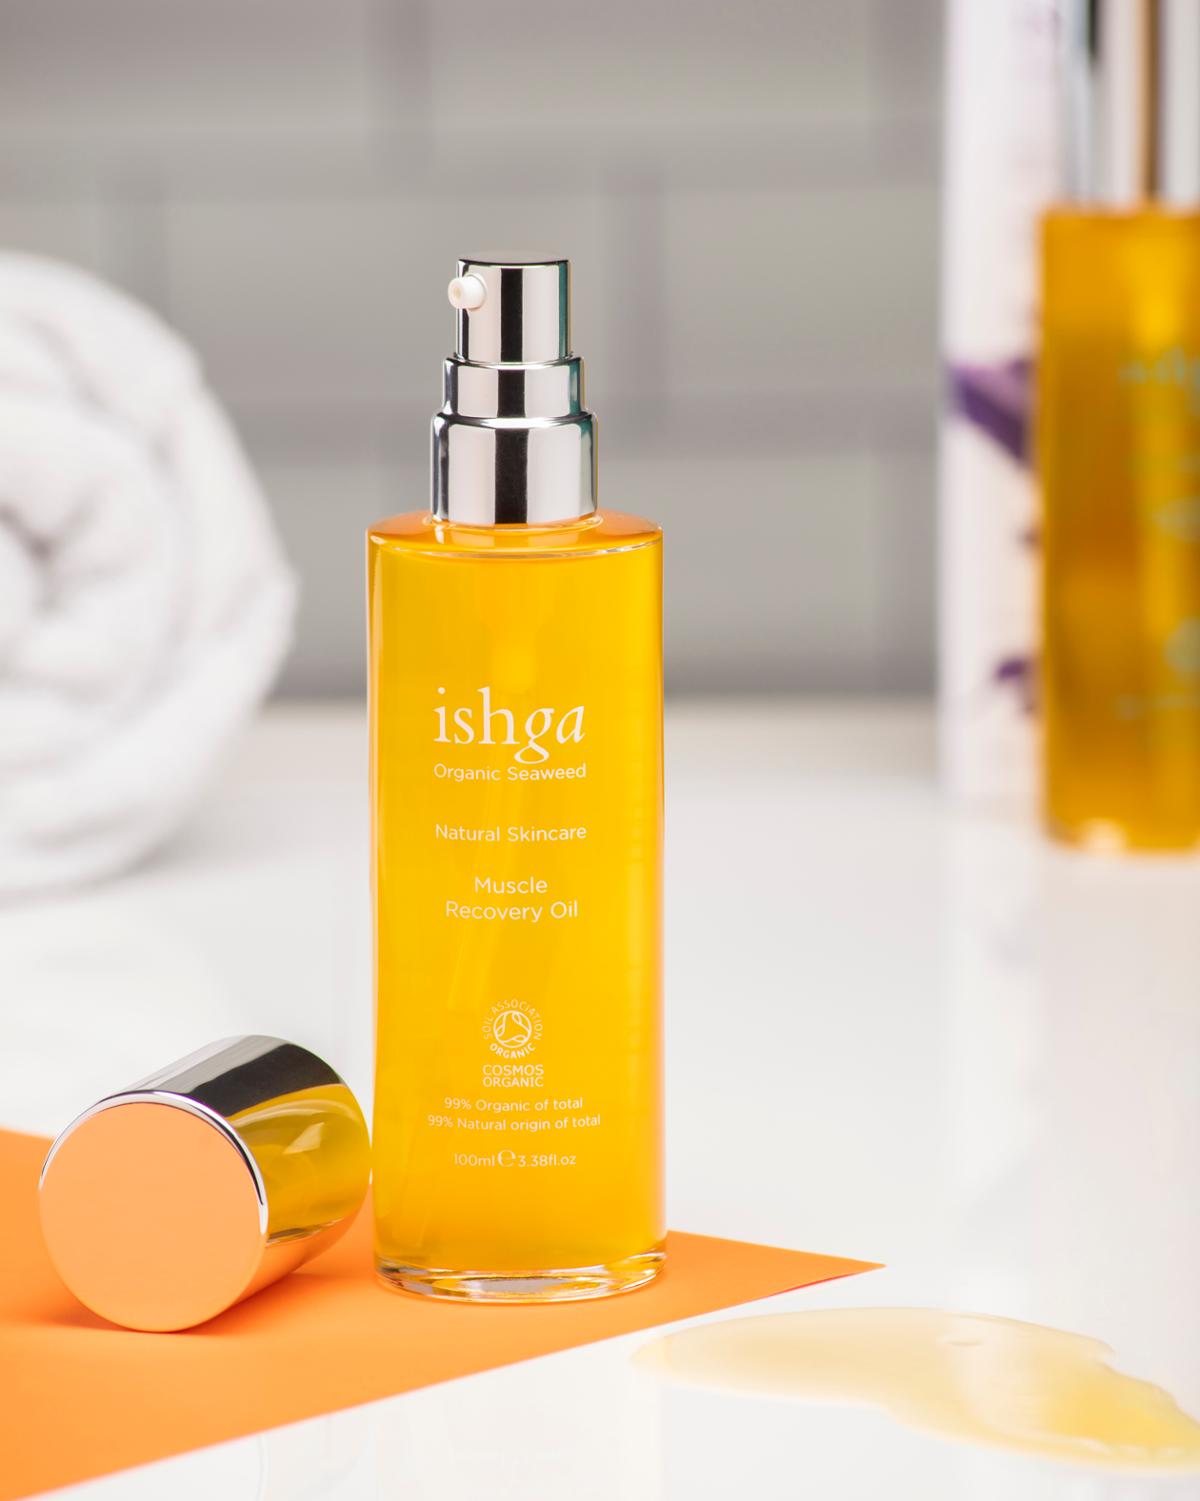 According to ishga, the oil aids blood circulation, increases the skin’s moisture content and provides a muscle-easing, anti-inflammatory effect
/ ishga